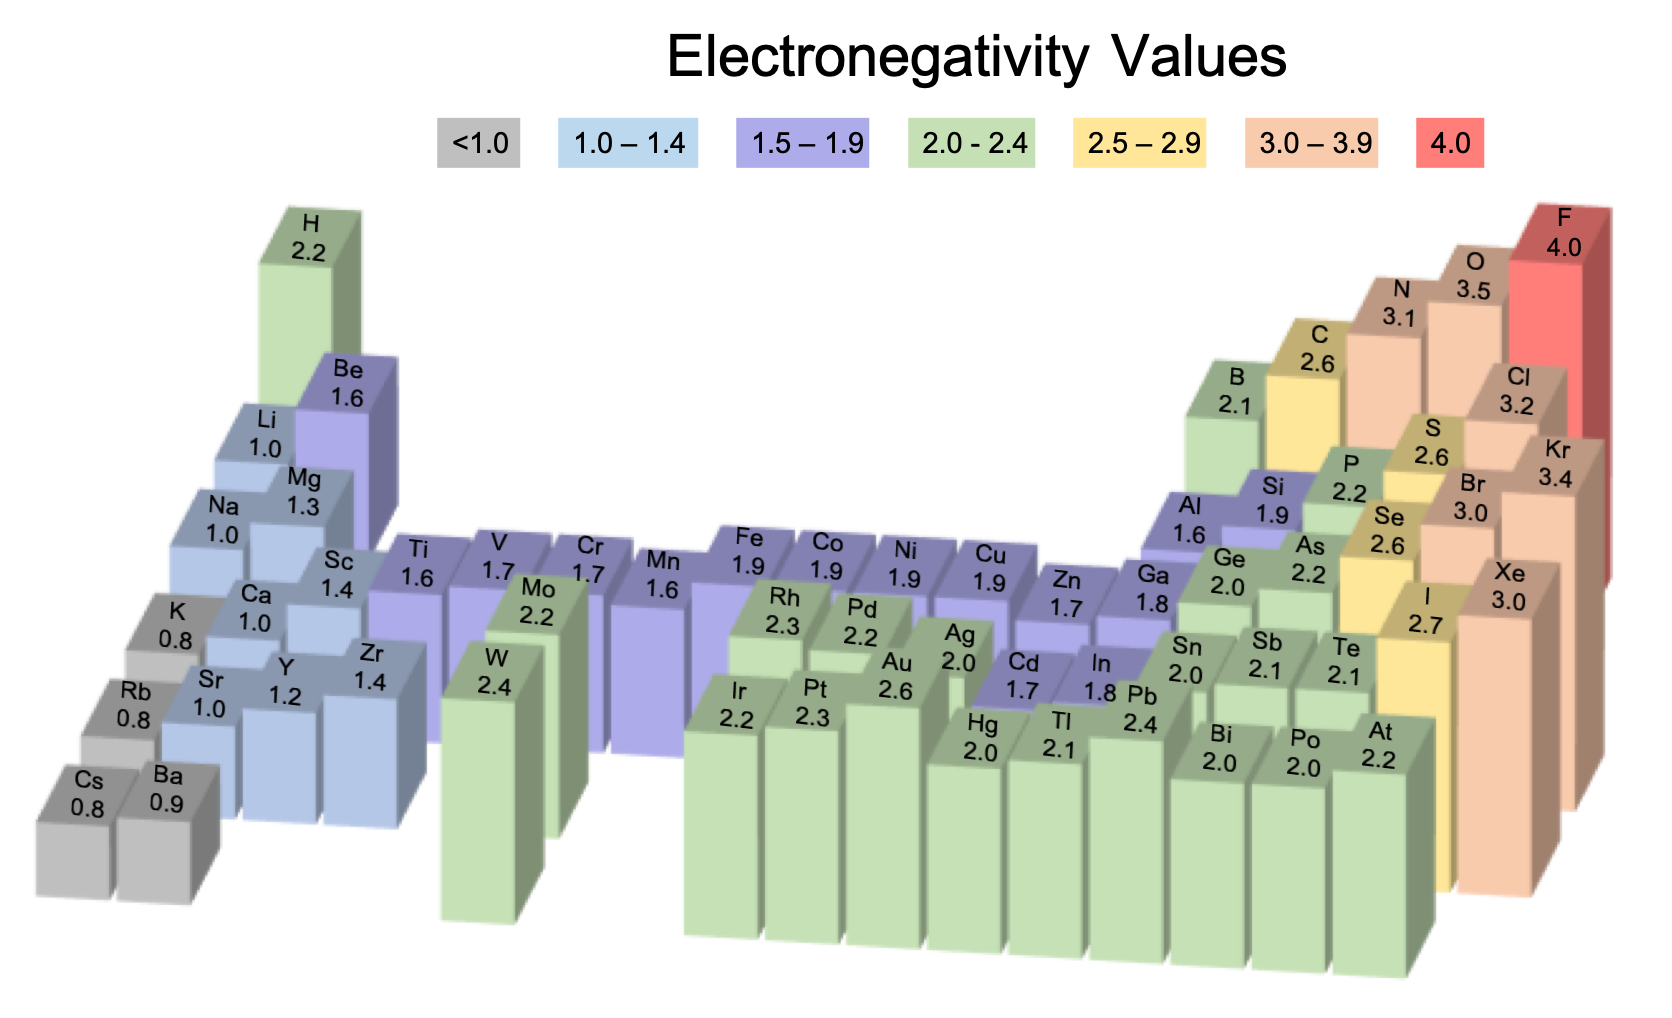 Part of the periodic table is shown. The height of a 3D bar graph shows the electronegativity values for almost all the elements according to the Pauling scale.